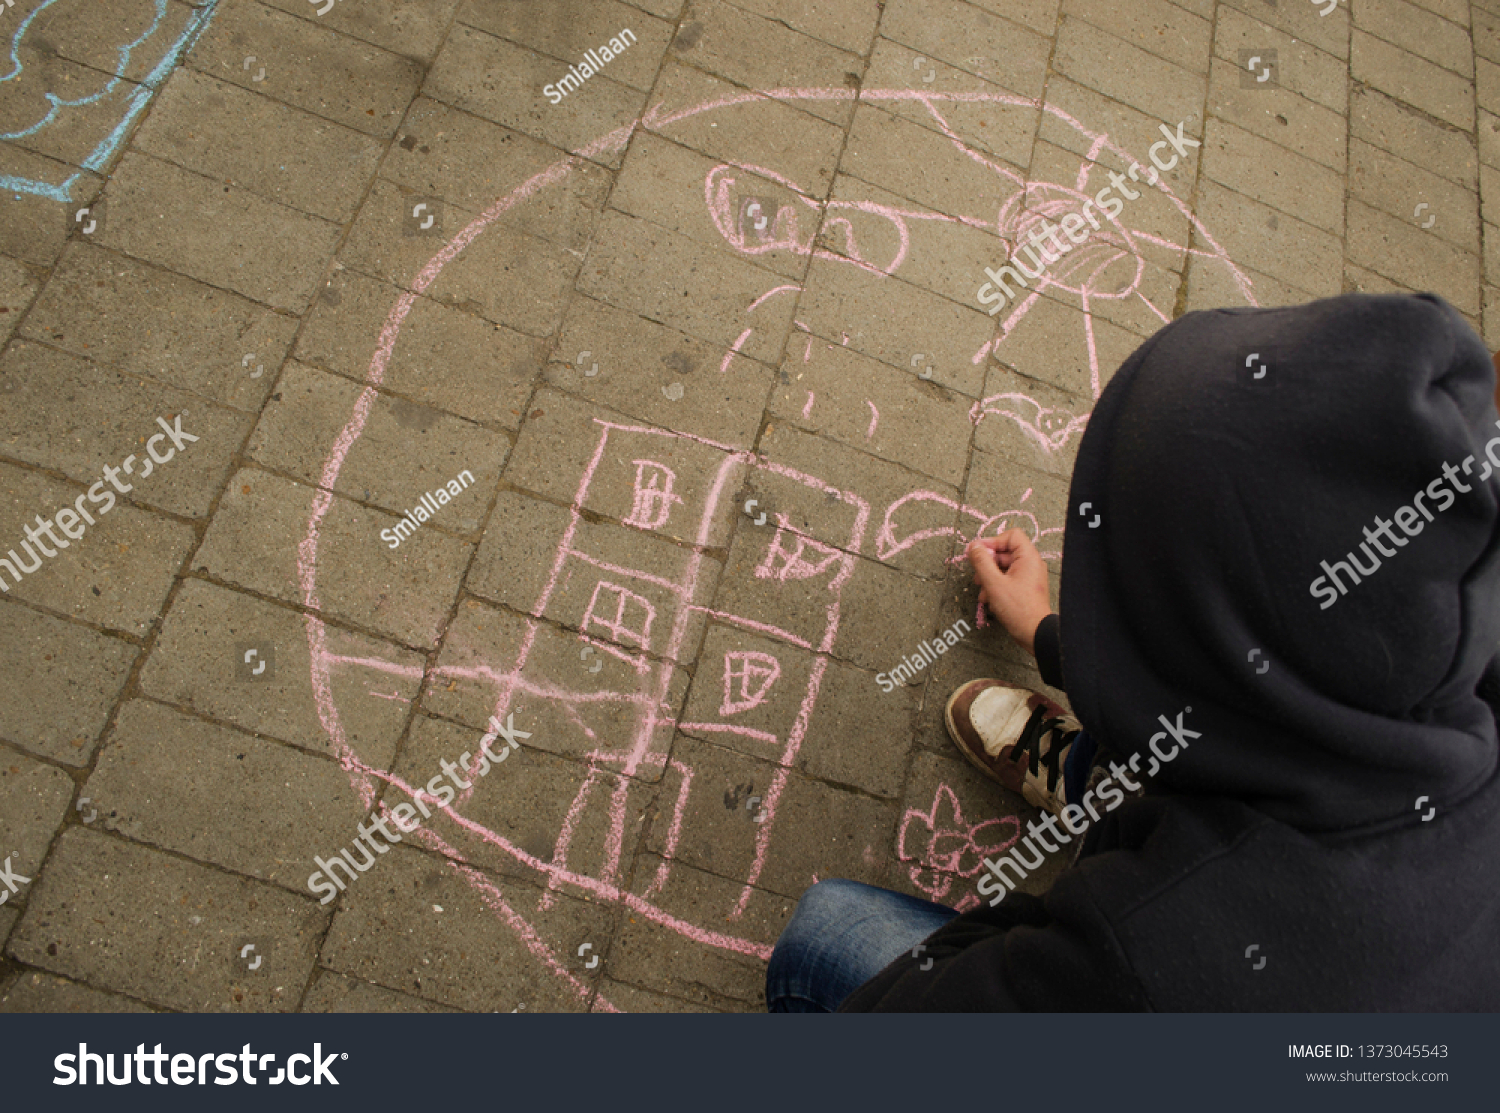 
The child draws on the pavement with colored chalk. Holiday, city day. #1373045543